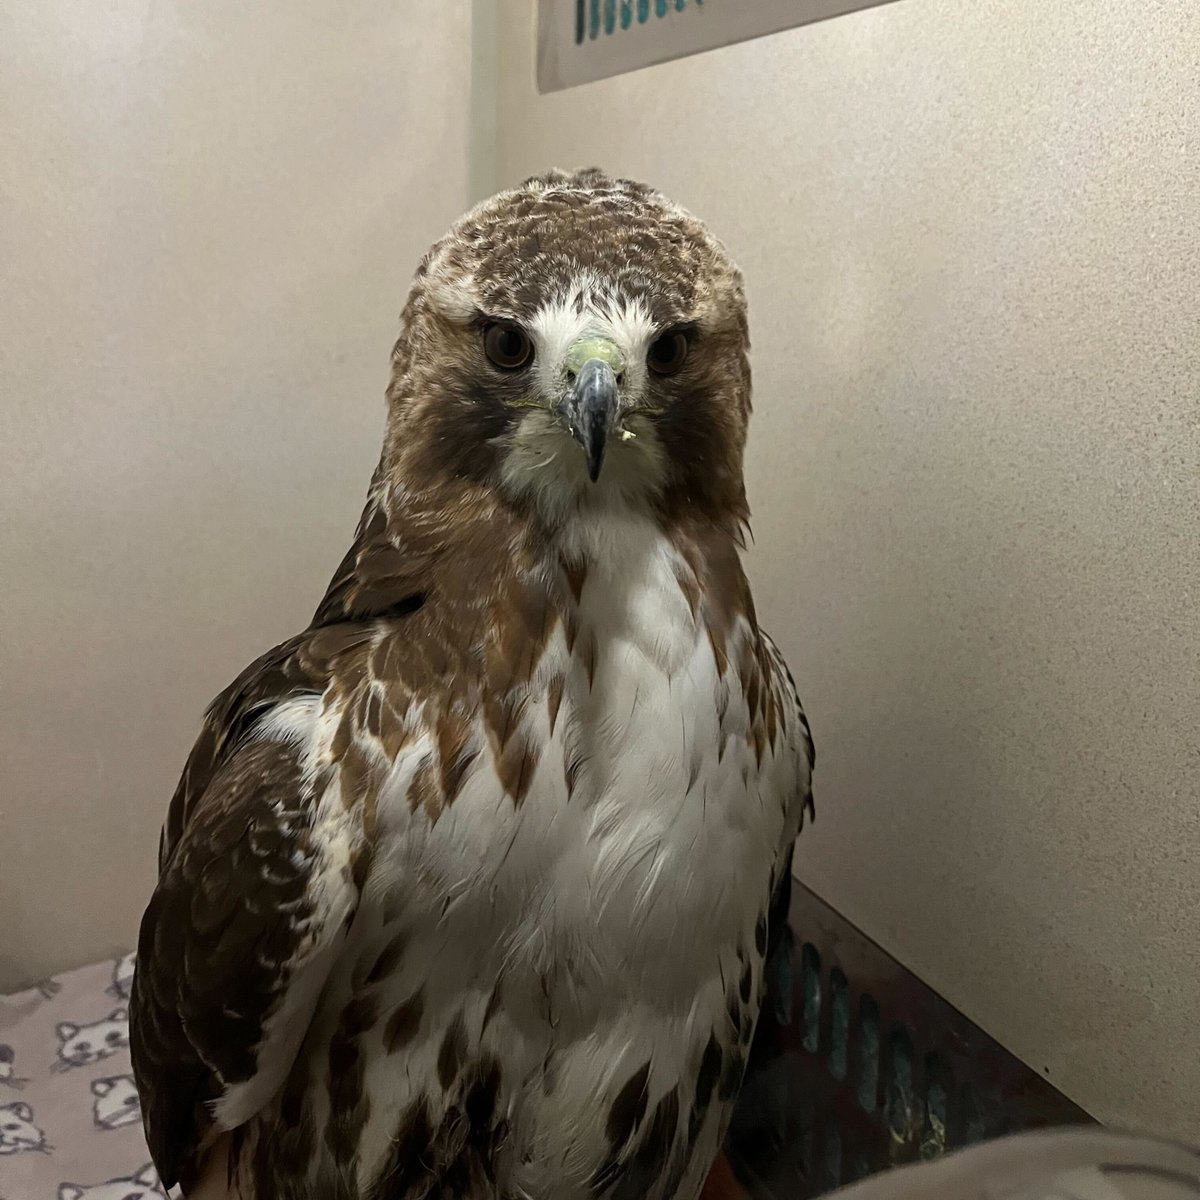 While Flaco the owl was flying free in NYC, consuming meal after meal of the poisoned rats that would contribute to his death, hundreds of wild, native raptors across the city were meeting the same fate. This is beautiful Boho, an adult red-tailed hawk.🧵 📷: Emily Einhorn